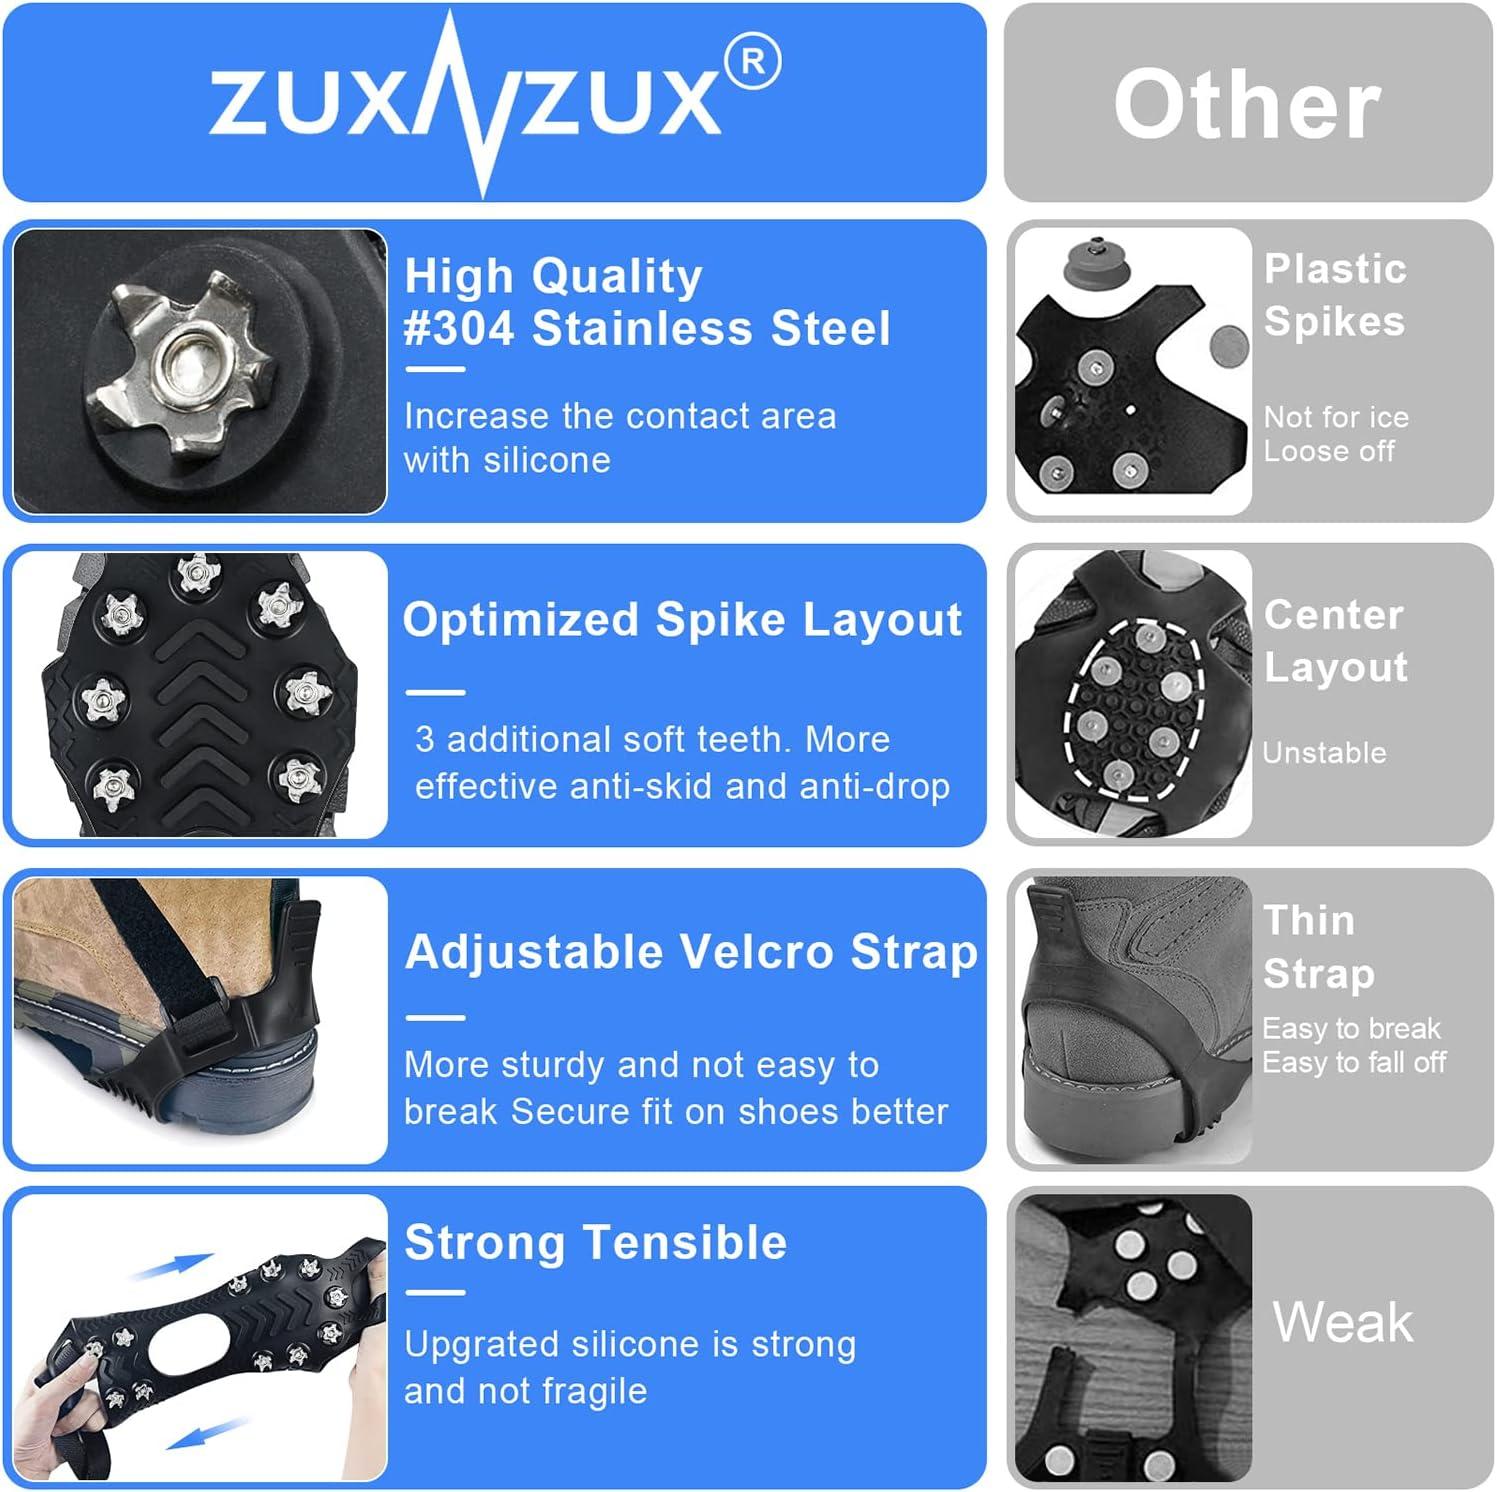 ZUXNZUX Crampons, Ice Cleats for Shoes and Boots, Silicone Stainless Steel  Grippers Shoe Spikes Grips Traction for Ice Snow, Winter Hiking Climbing Ice  Fishing Medium Silicone & 304 Stainless Steel